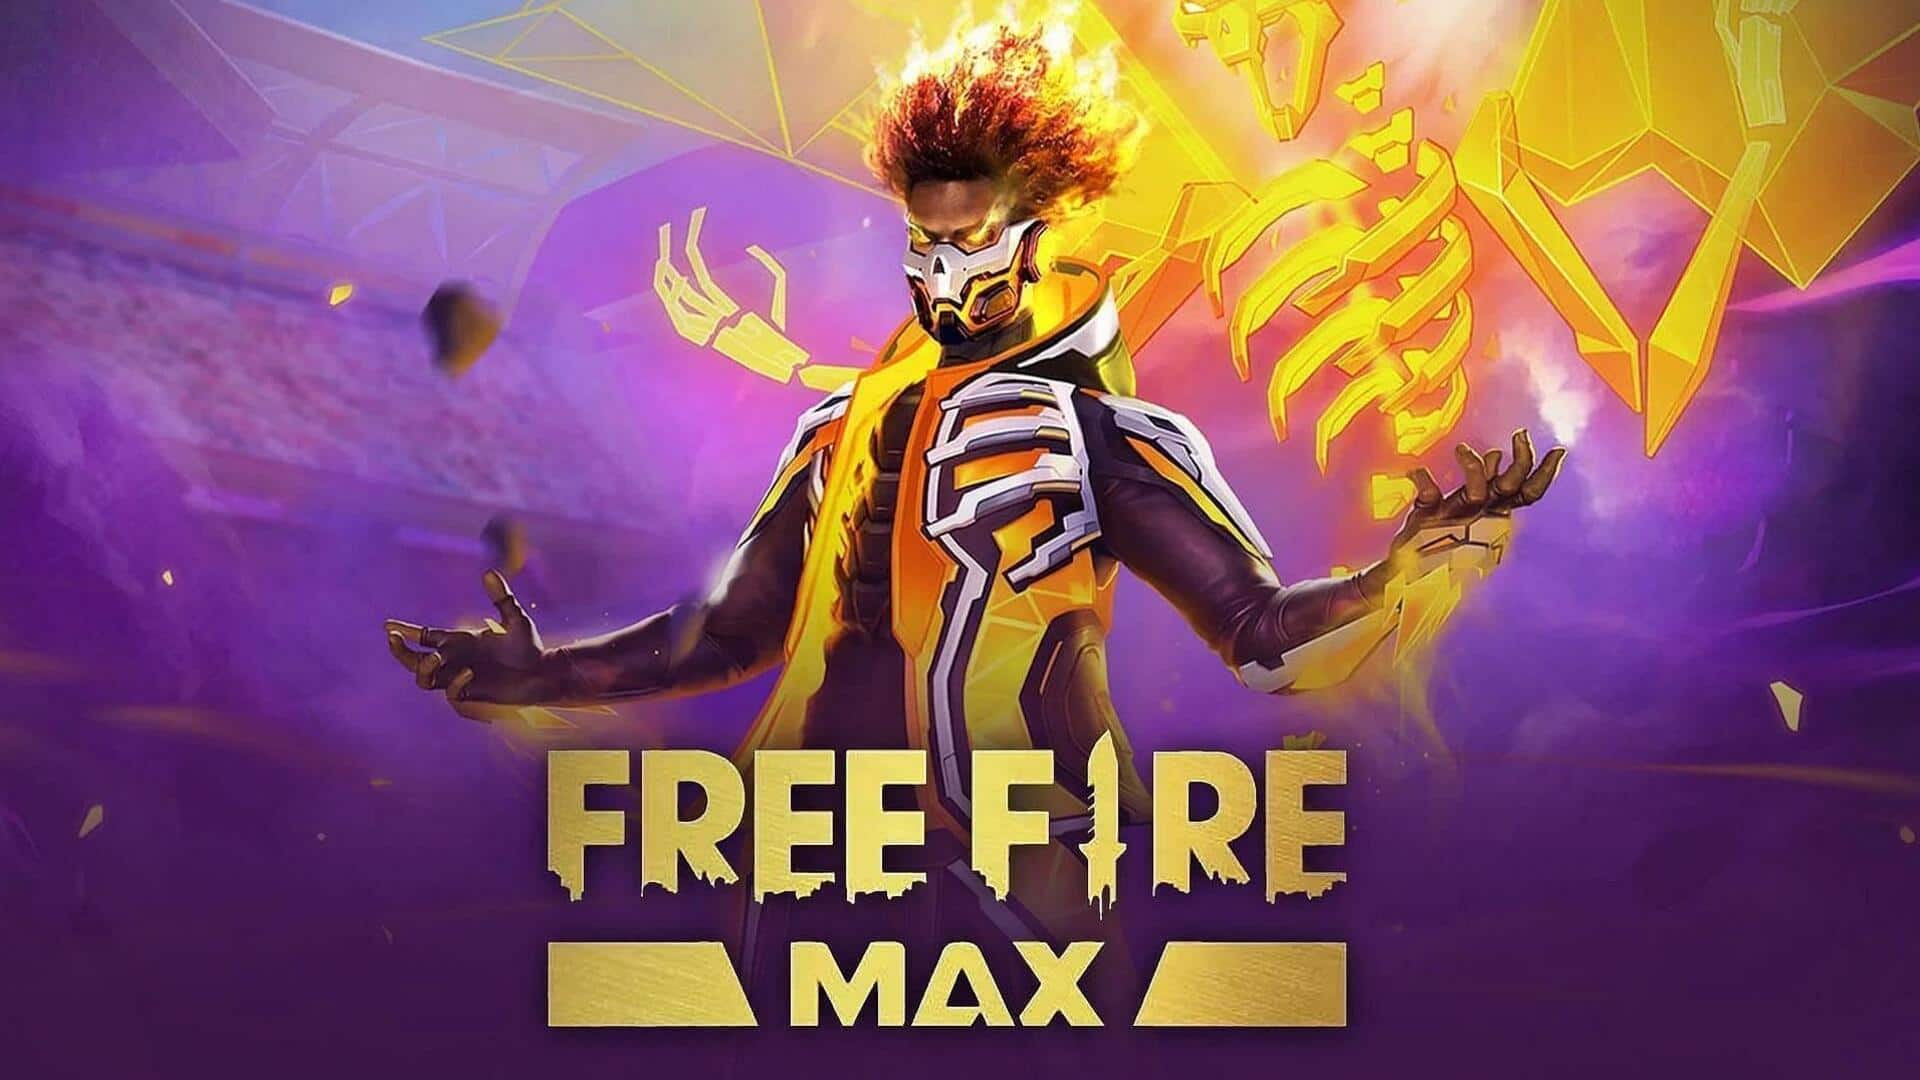 Garena Free Fire MAX September 18 codes: How to redeem